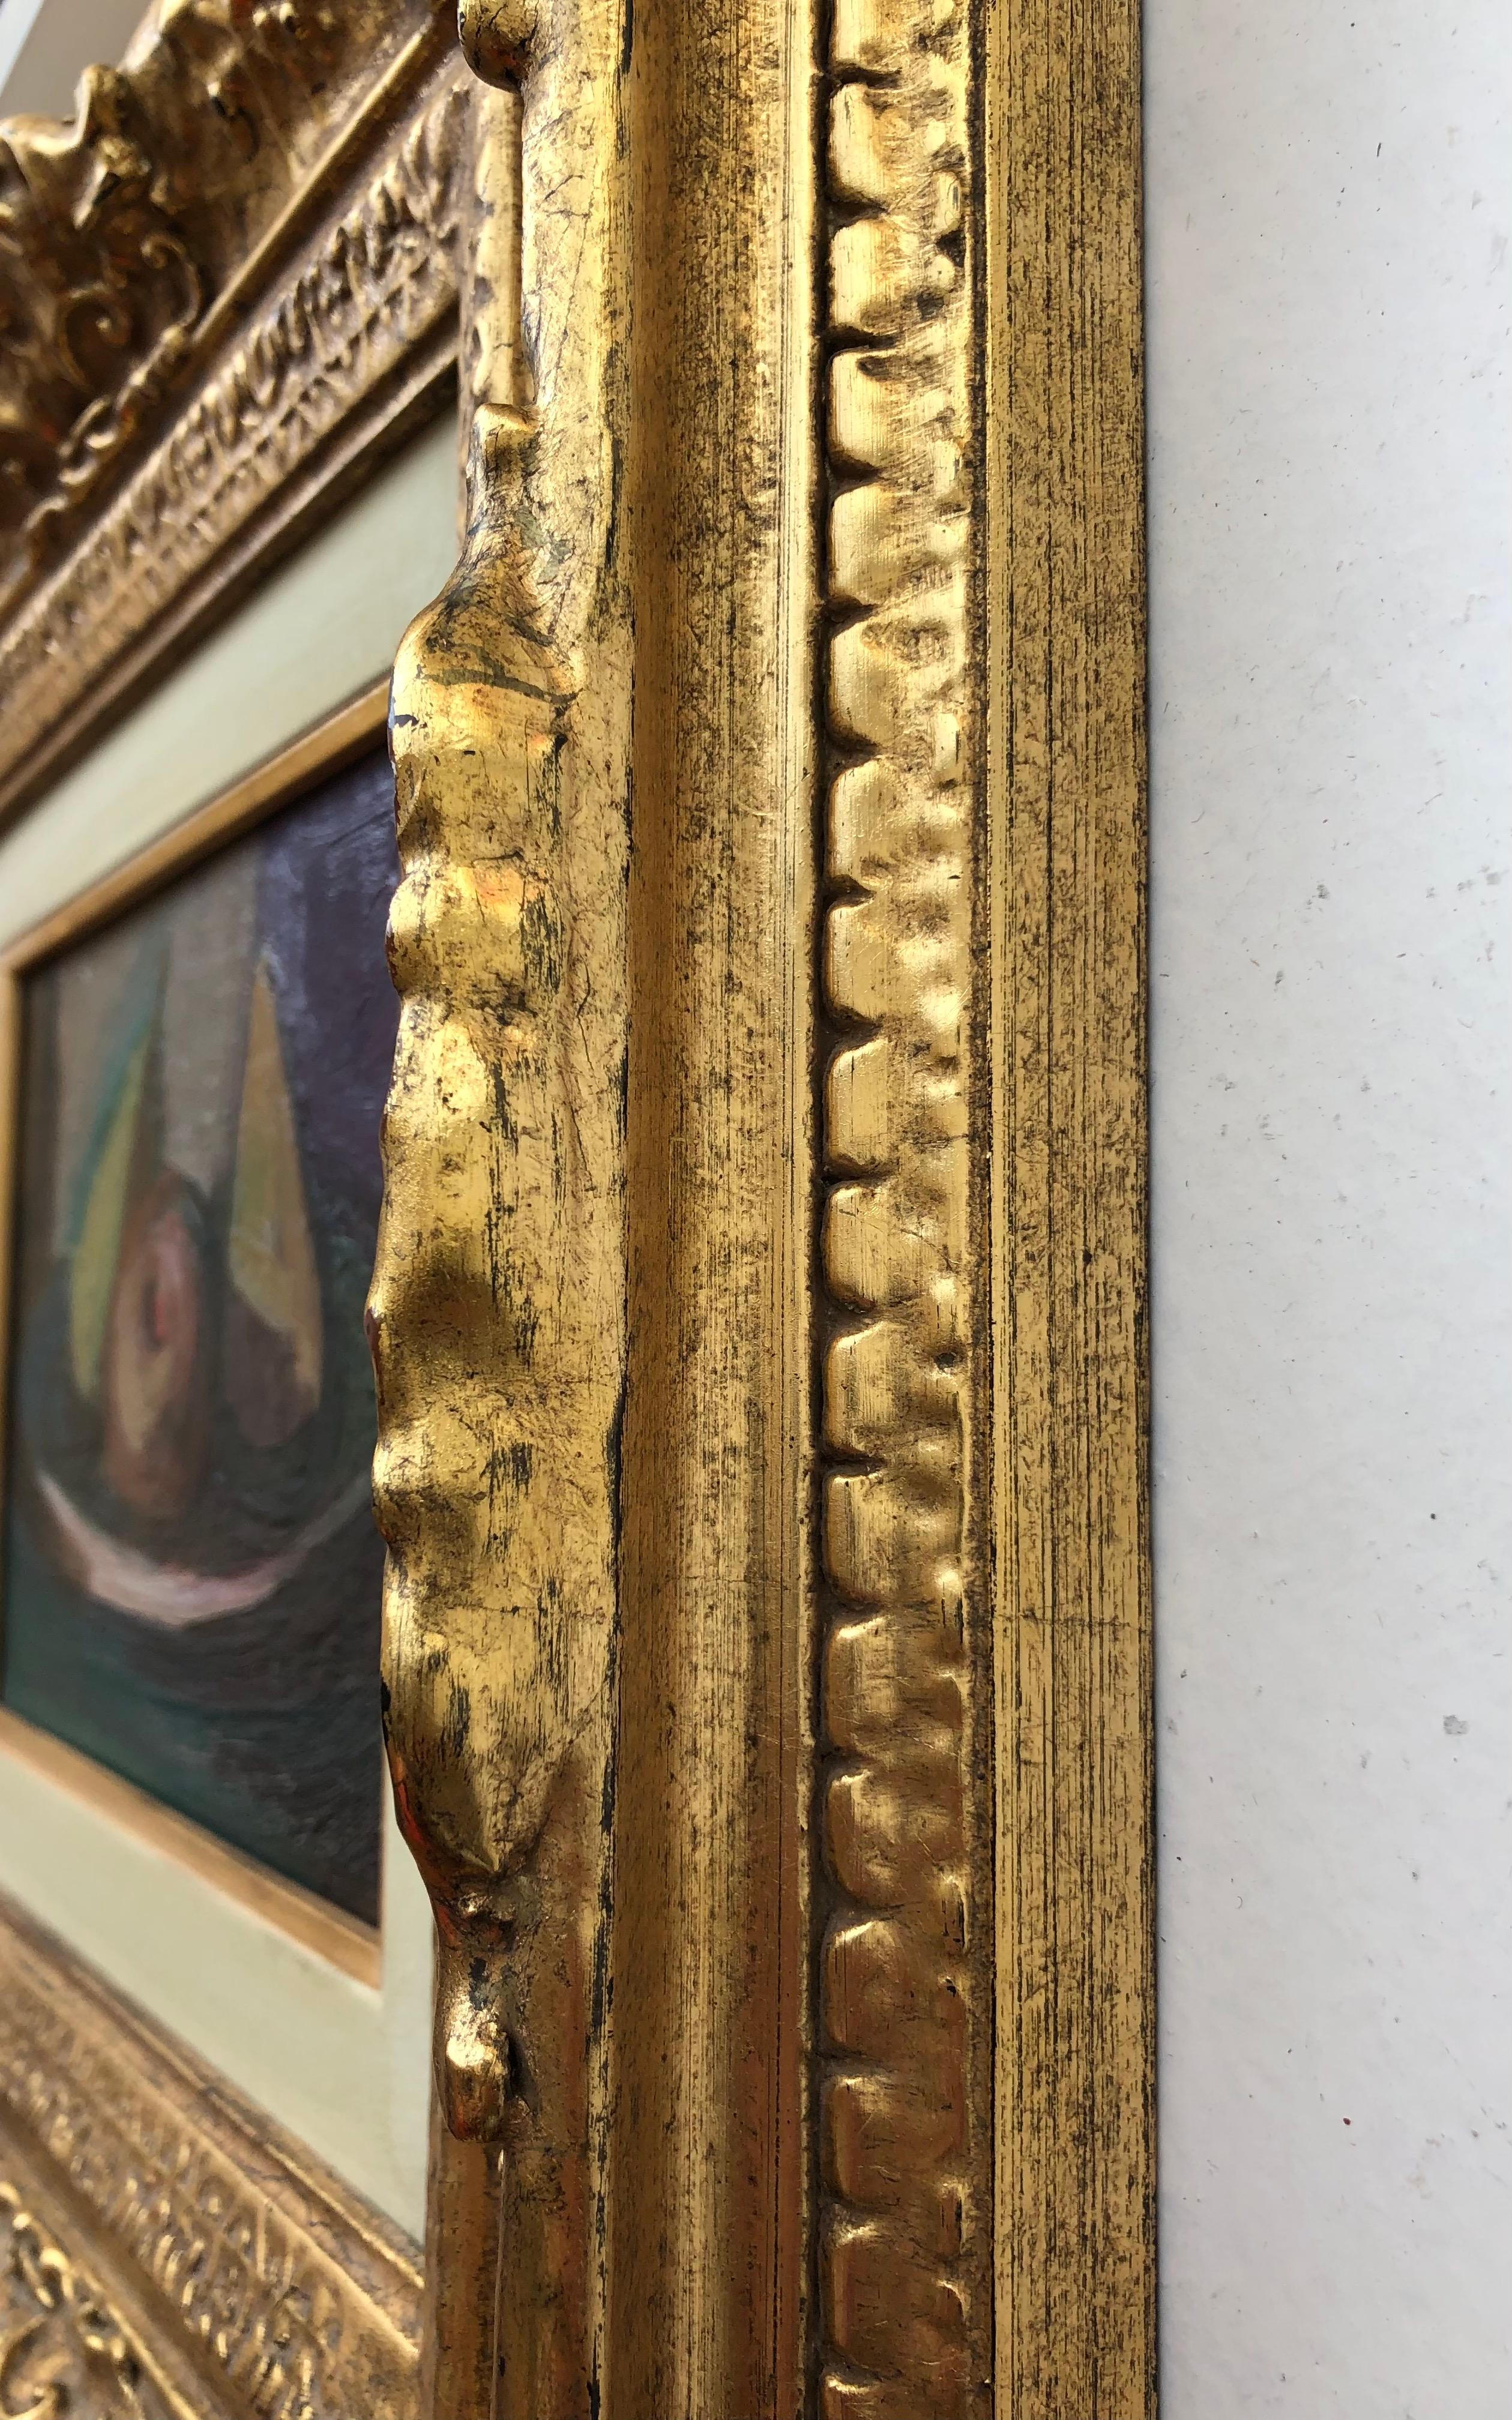 Work on canvas
Molded frame in plaster and gilded wood
35.5 x 41.5 x 7 cm